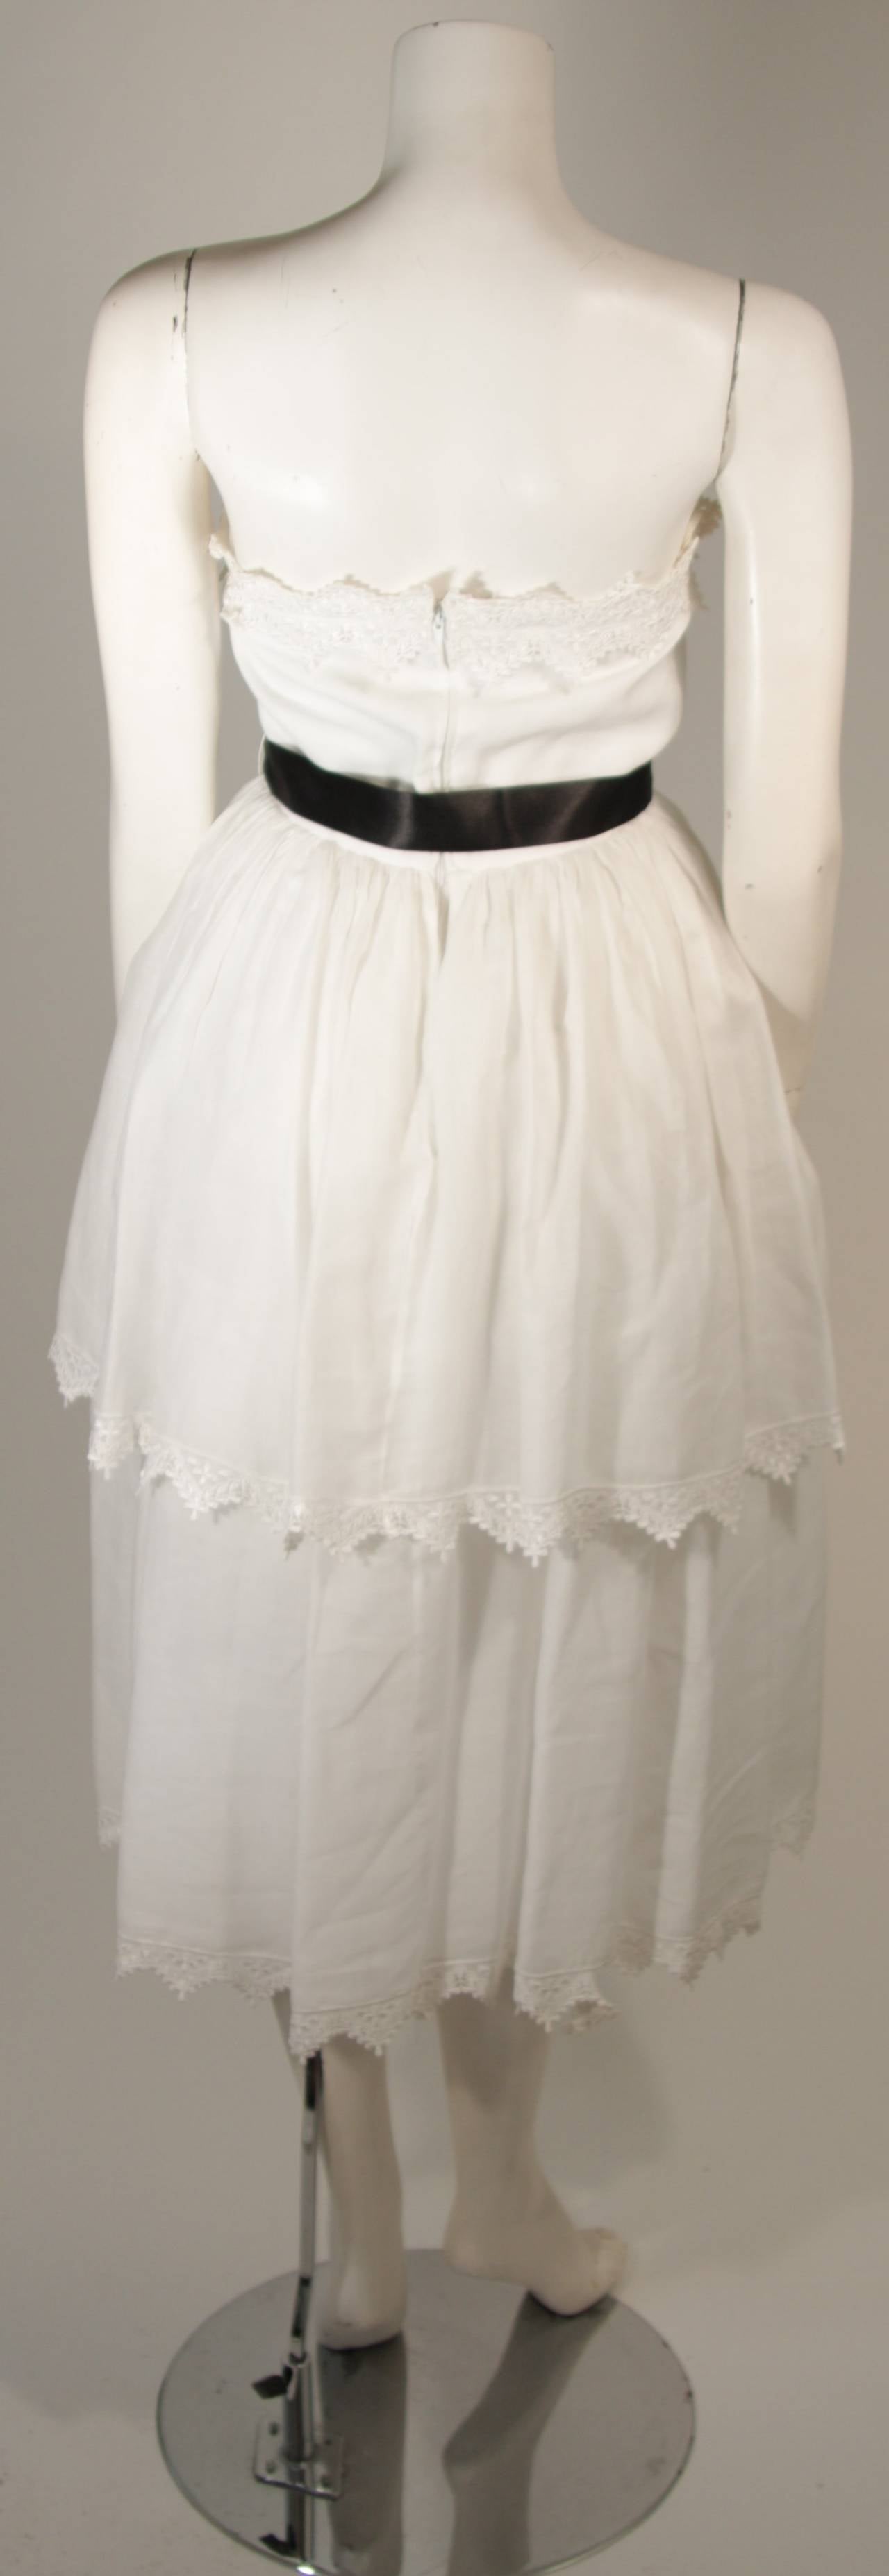 Albert Capraro White Cotton Tiered Dress with Scalloped Lace Edges Size 6 For Sale 1